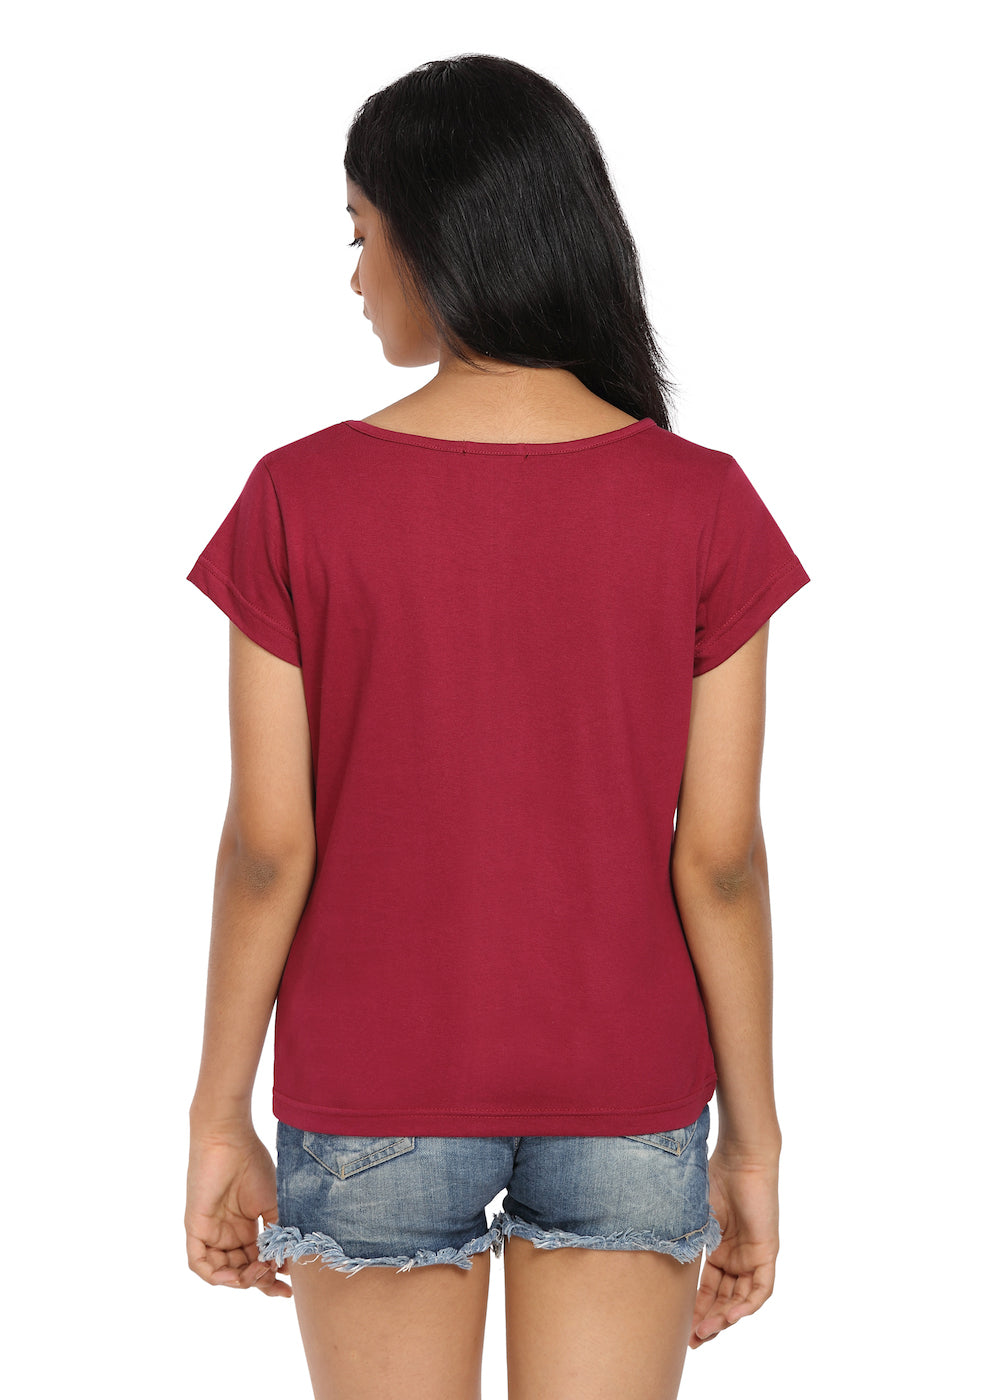 Printed T-shirt Wine with Happiness Print - GENZEE